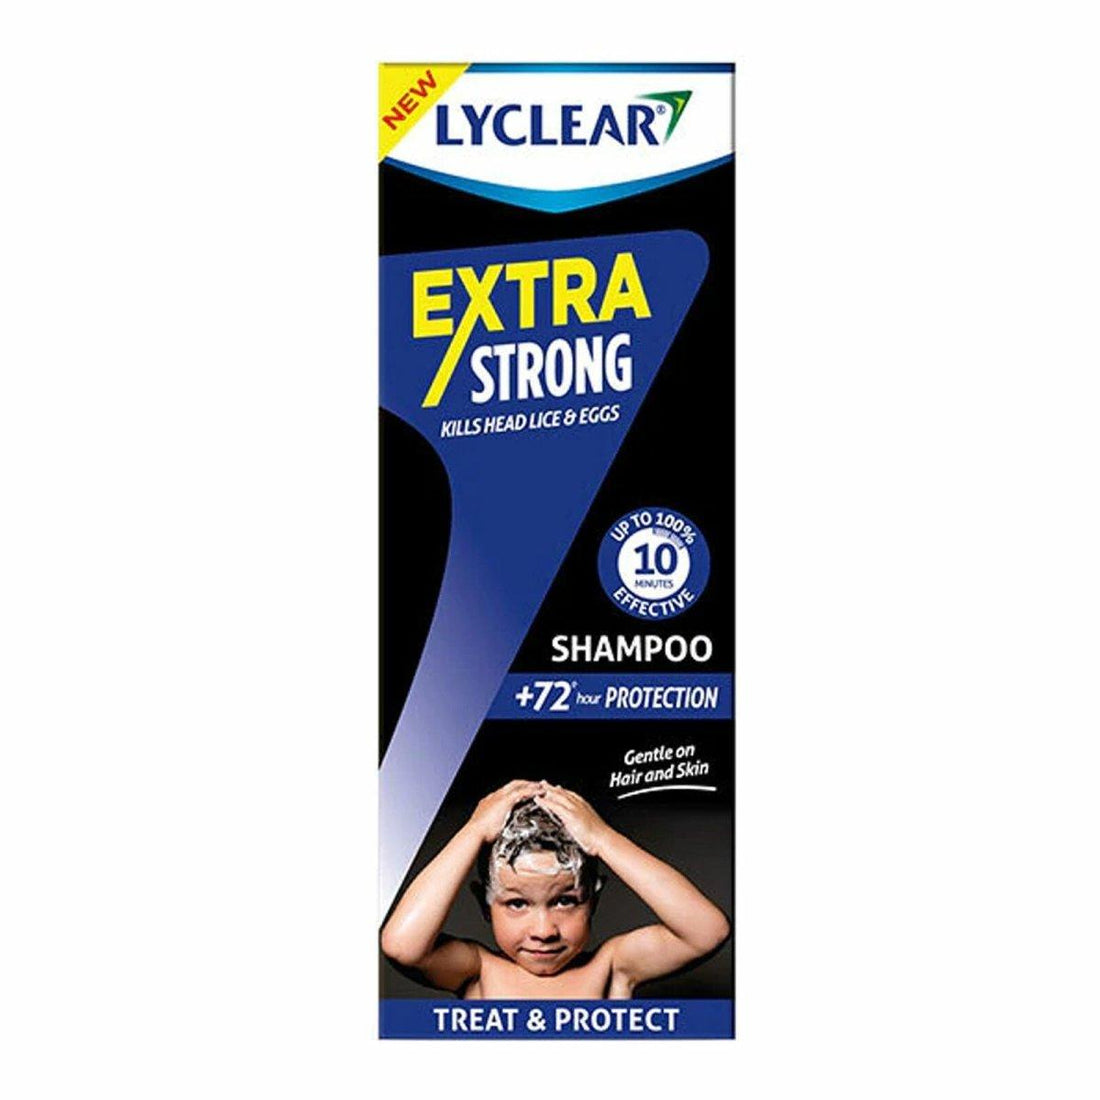 Lyclear Extra Strong Shampoo - Rightangled